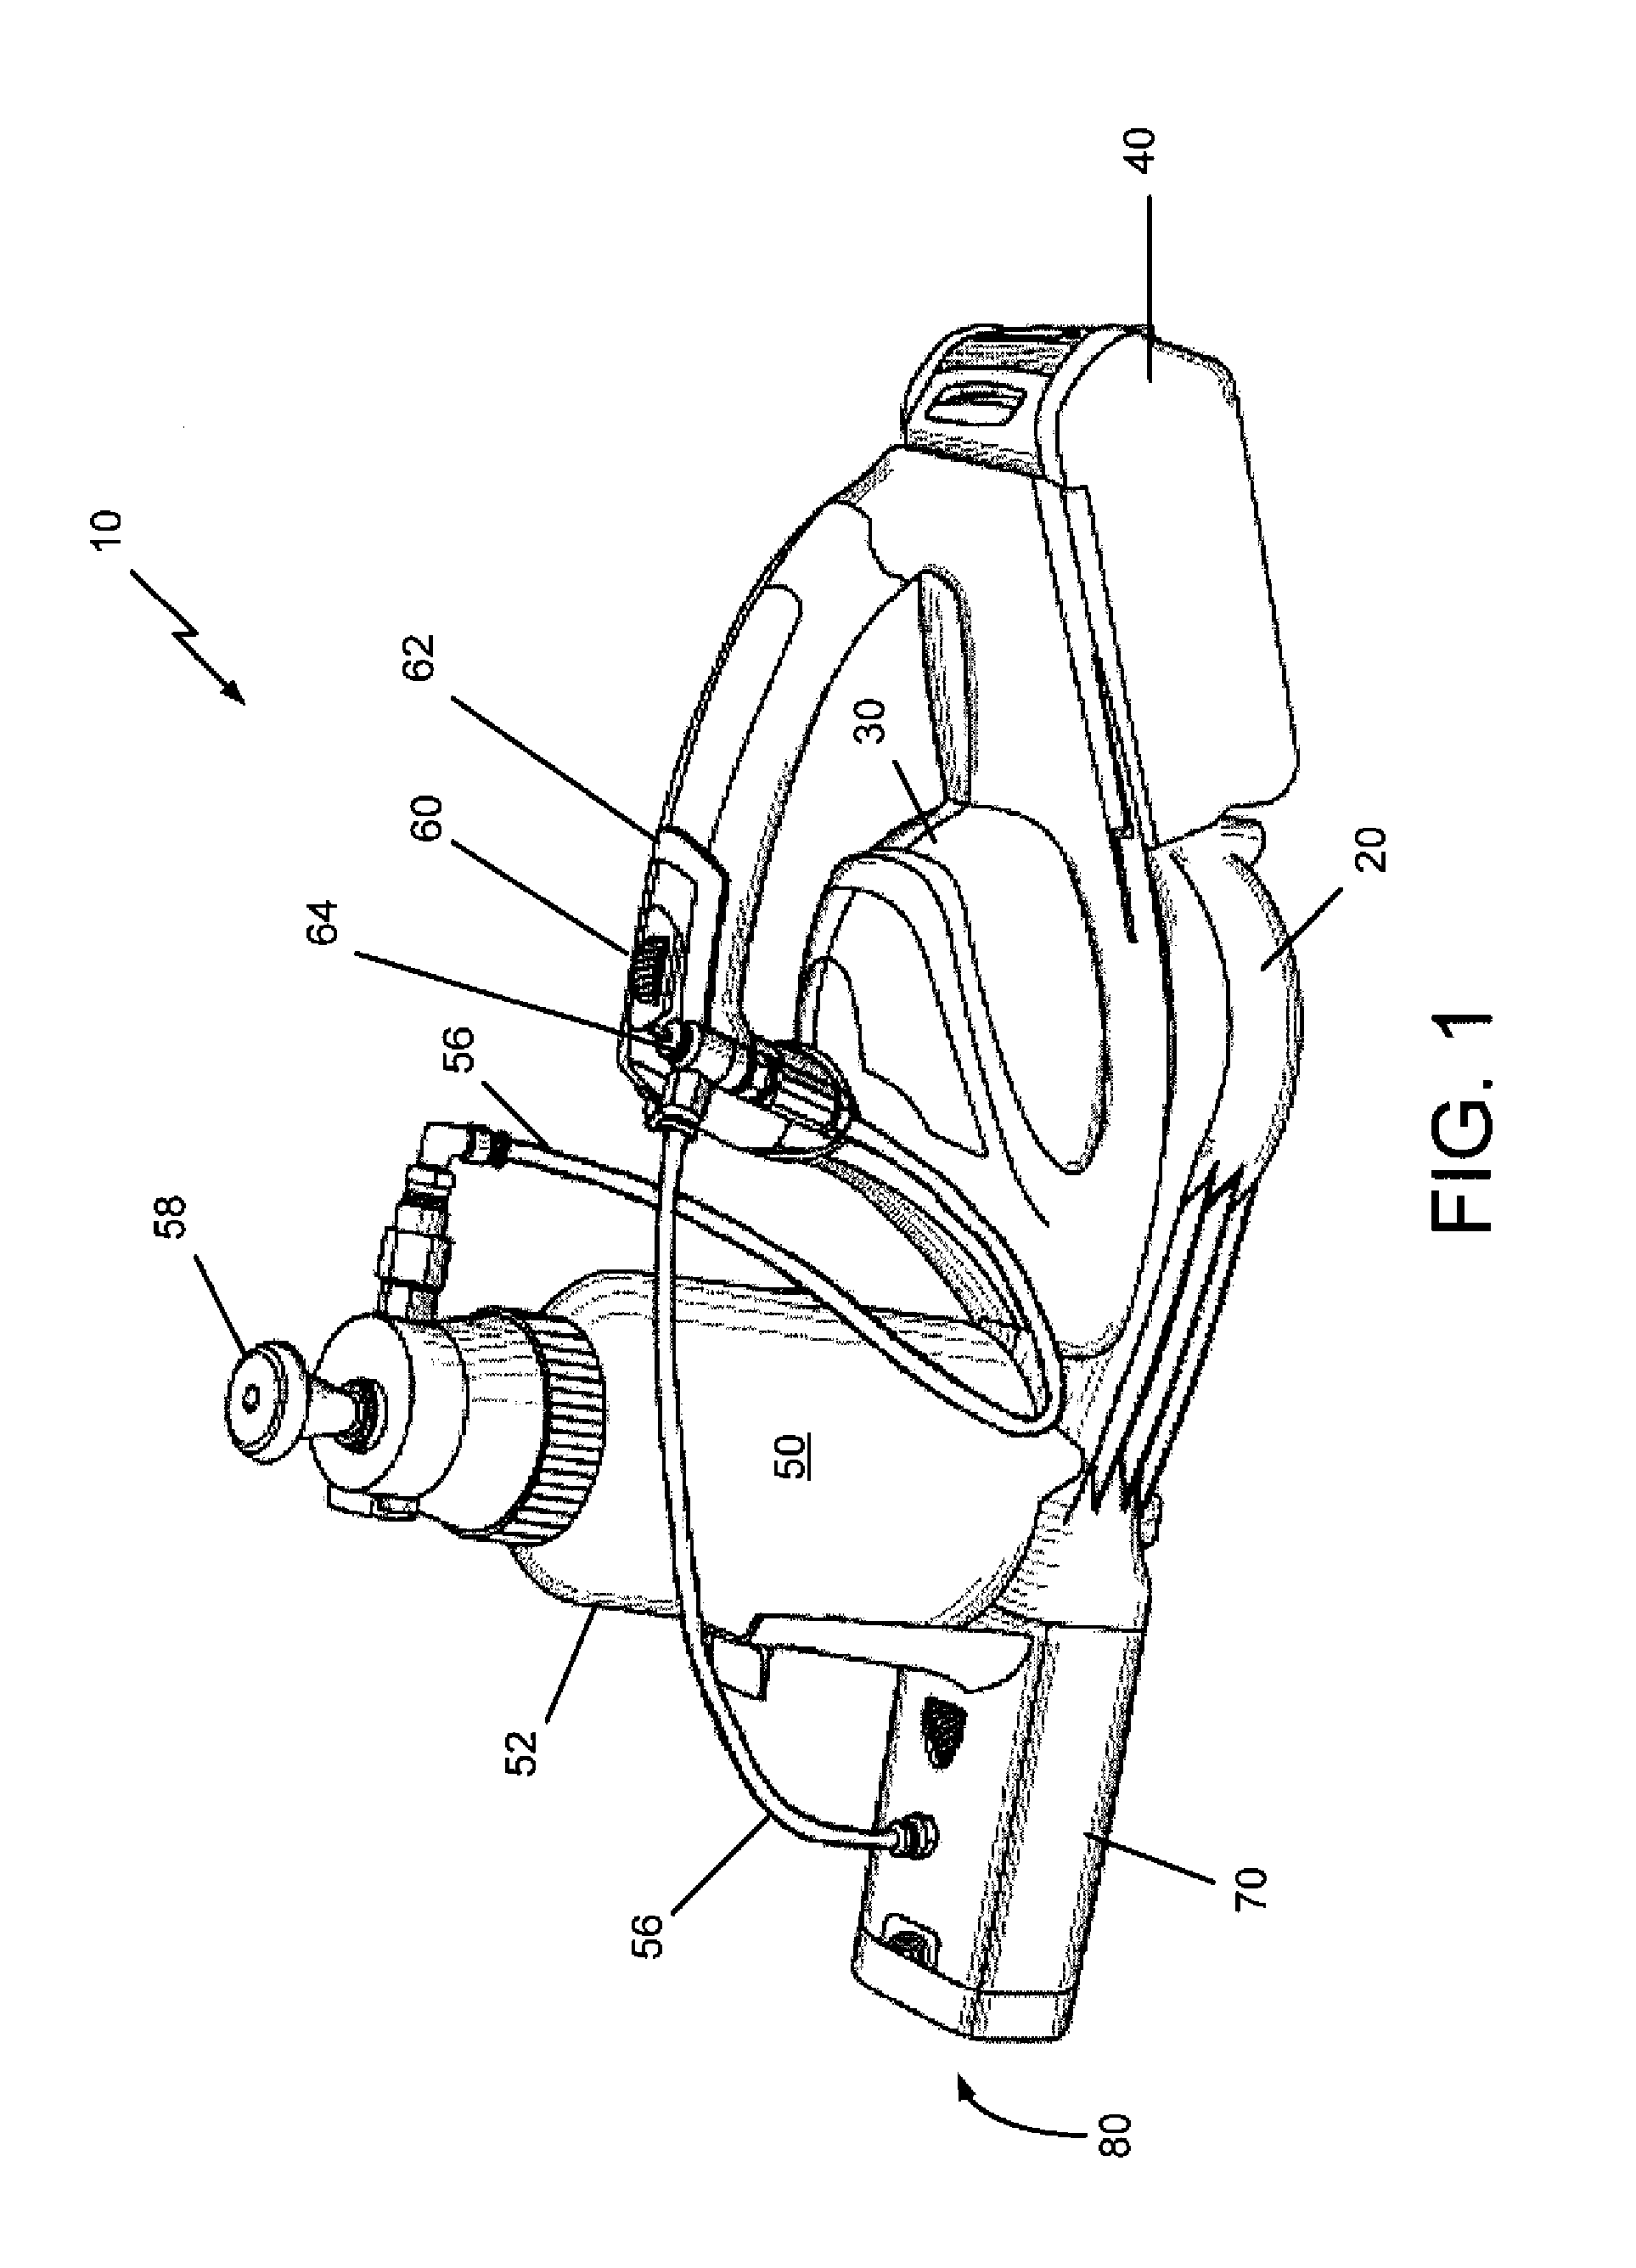 Heatless and cordless fogging/misting apparatus having a low CFM DC-powered blower motor and a mixing chamber for ultra-low volume atomized fog